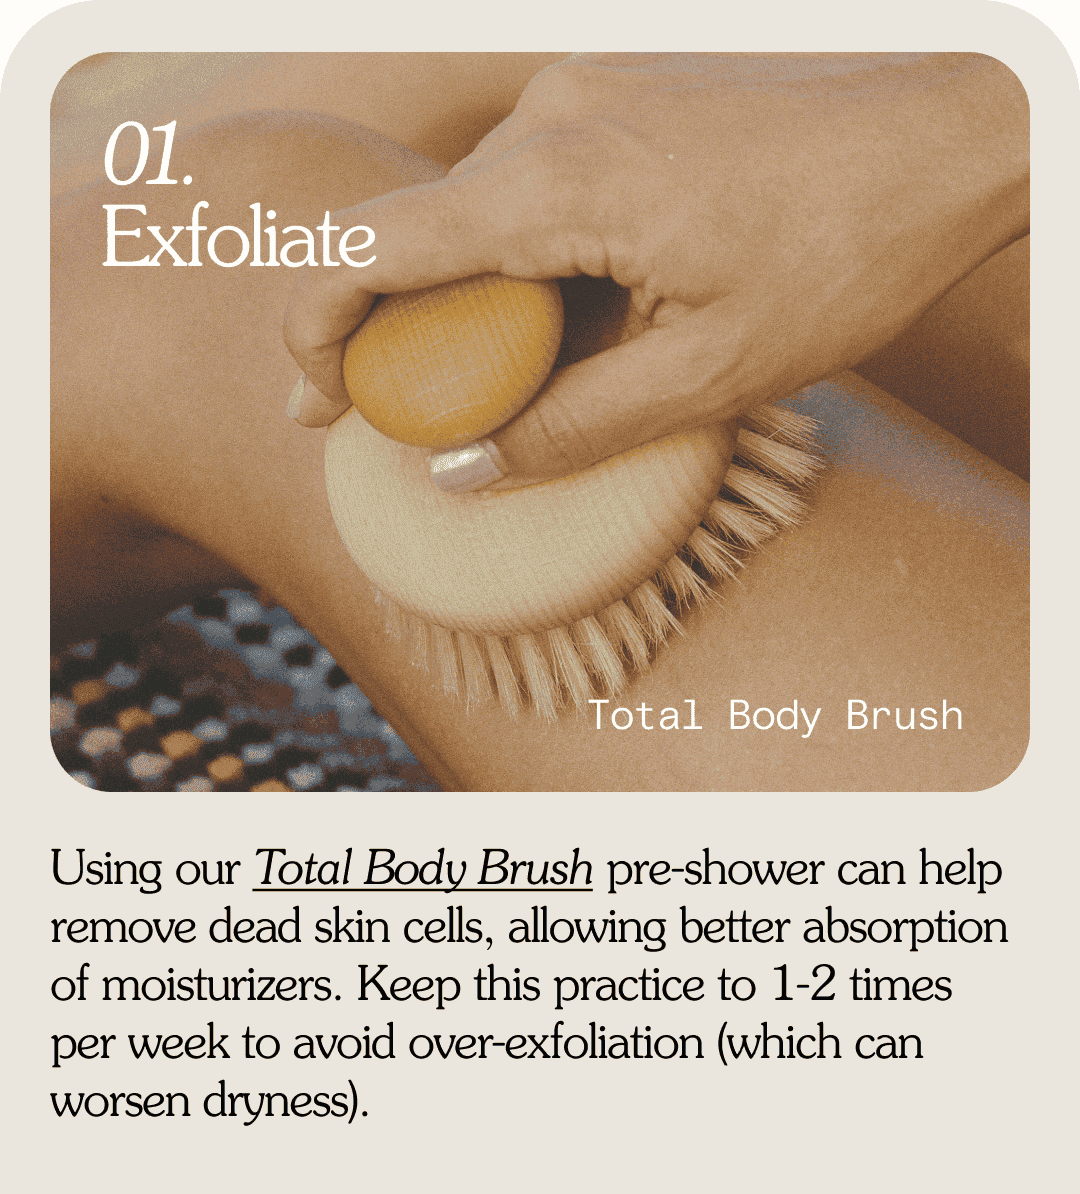 01. Exfoliate Total Body Brush Using our Total Body Brush pre-shower can help remove dead skin cells, allowing better absorption of moisturizers. Keep this practice to 1-2 times per week to avoid over-exfoliation (which can worsen dryness).